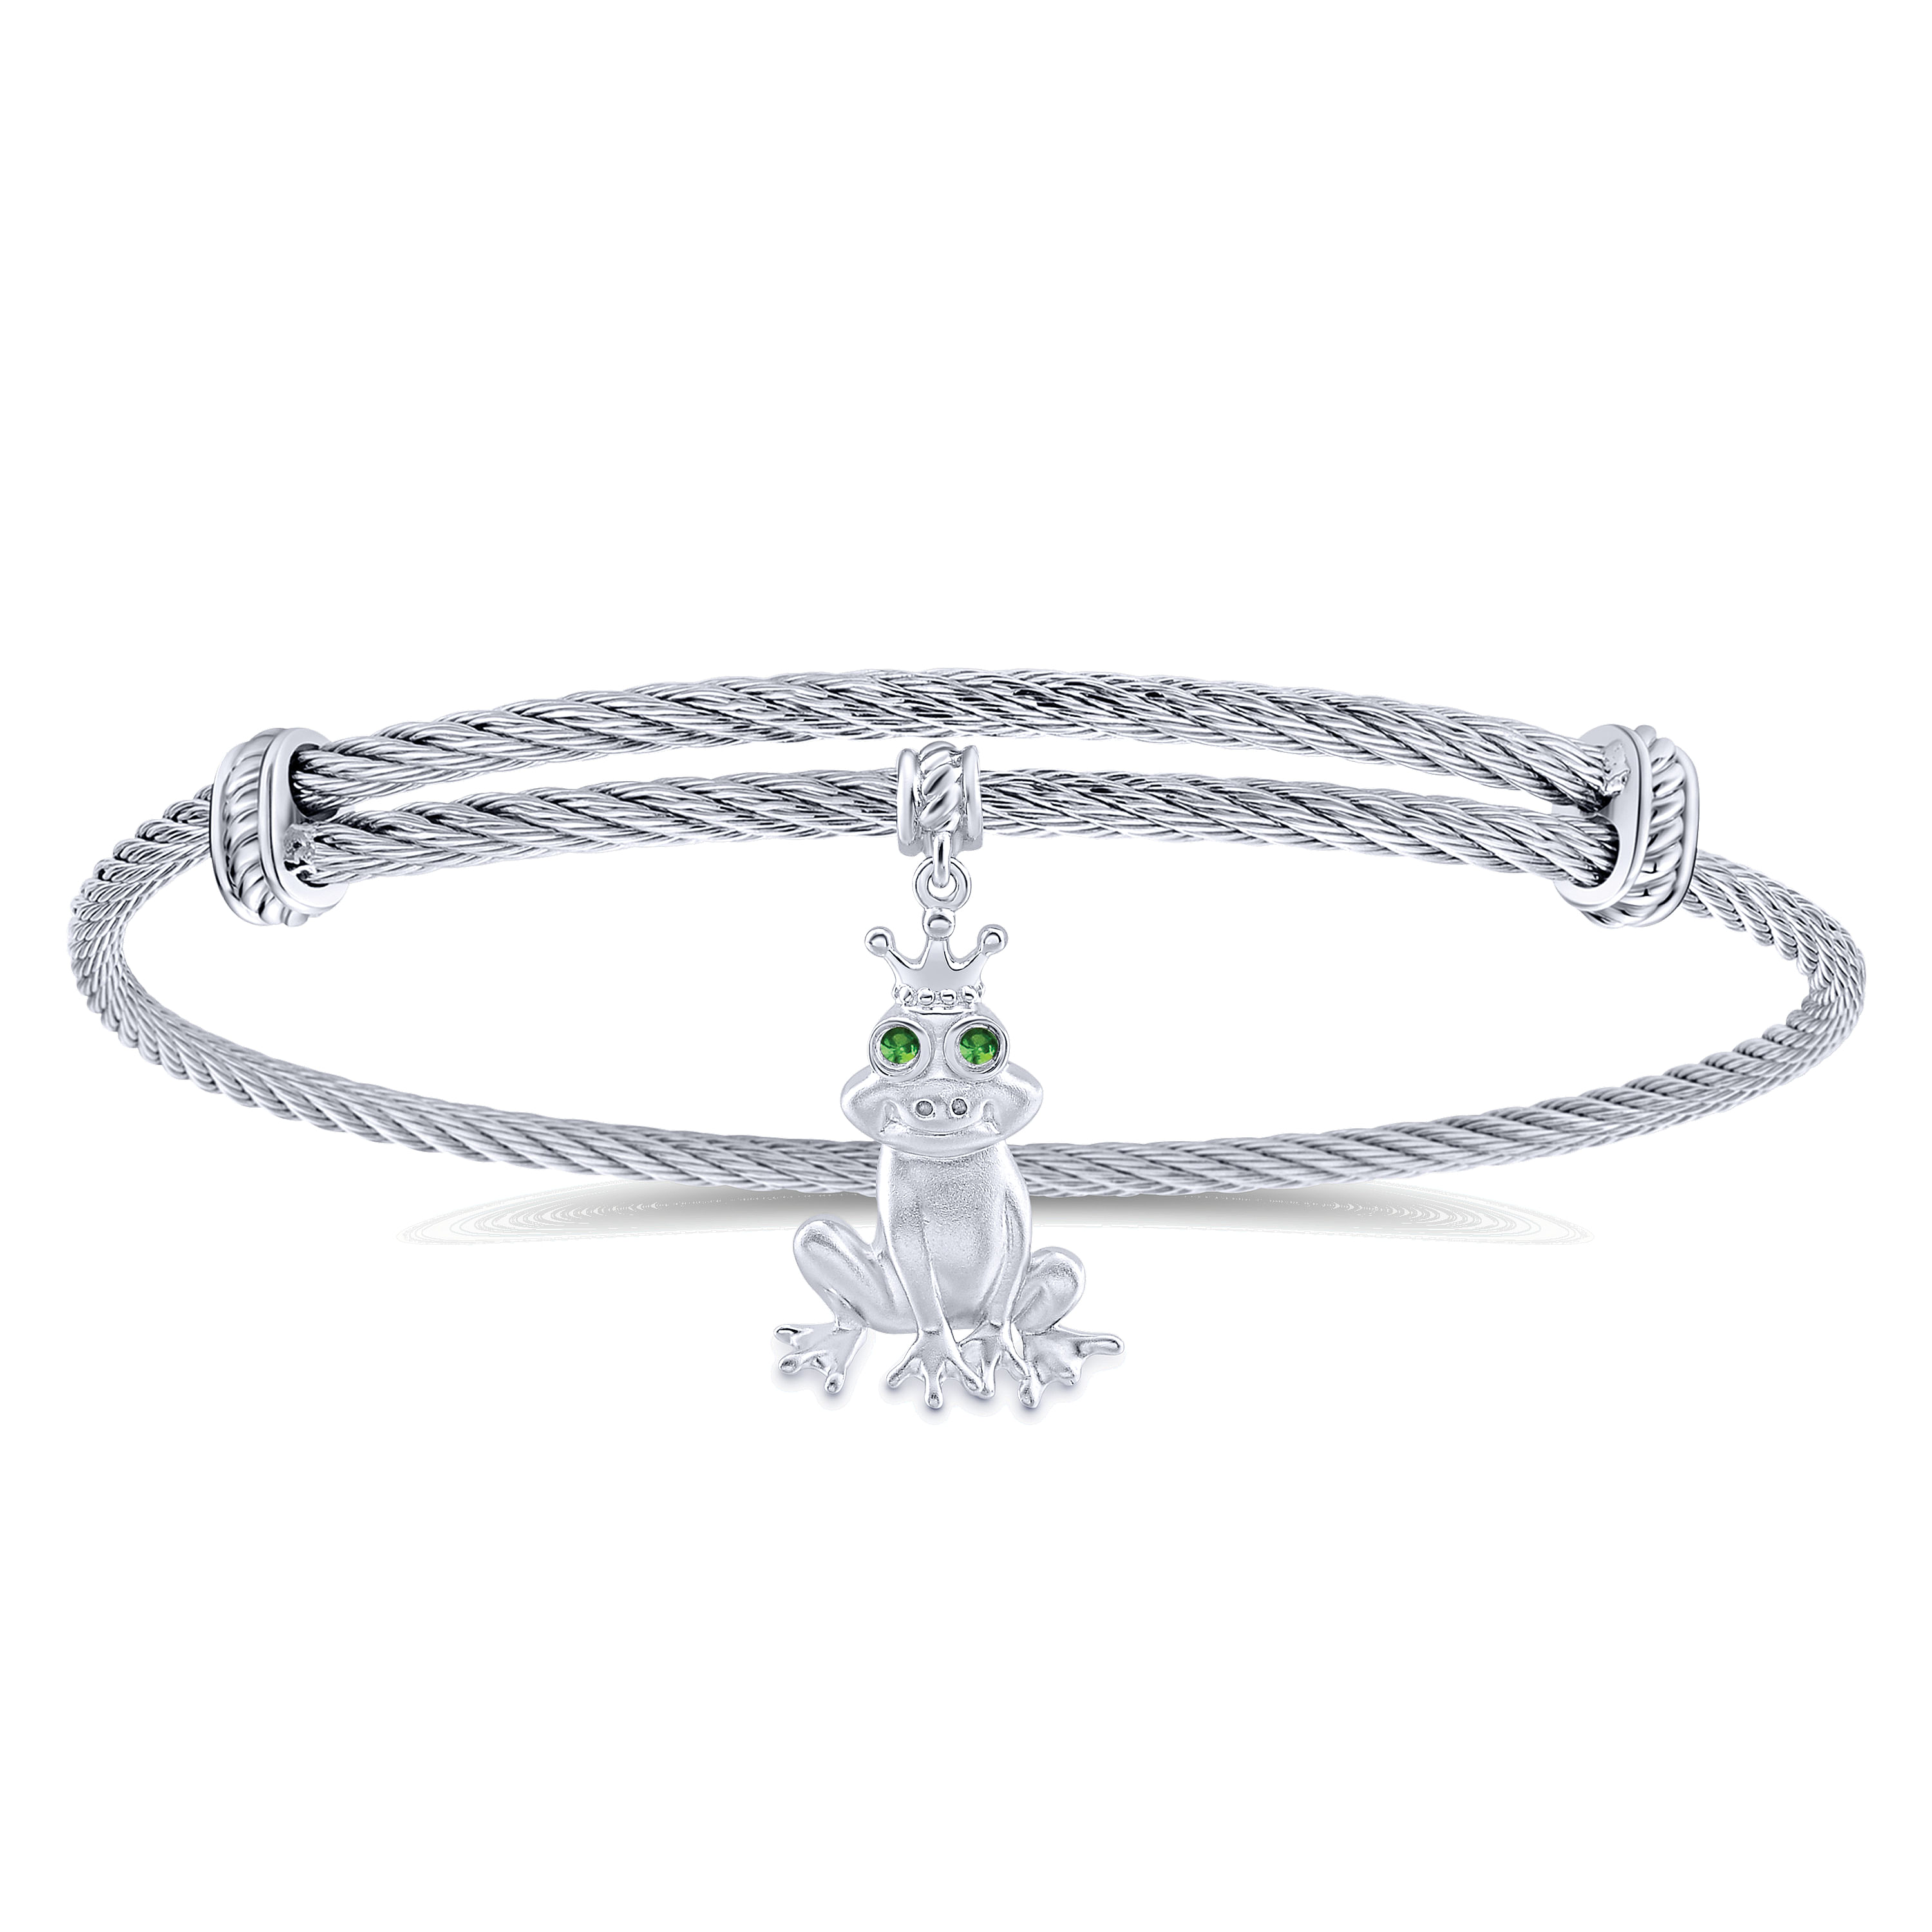 Twisted Cable Stainless Steel Bangle with Sterling Silver Emerald Eye Frog Charm